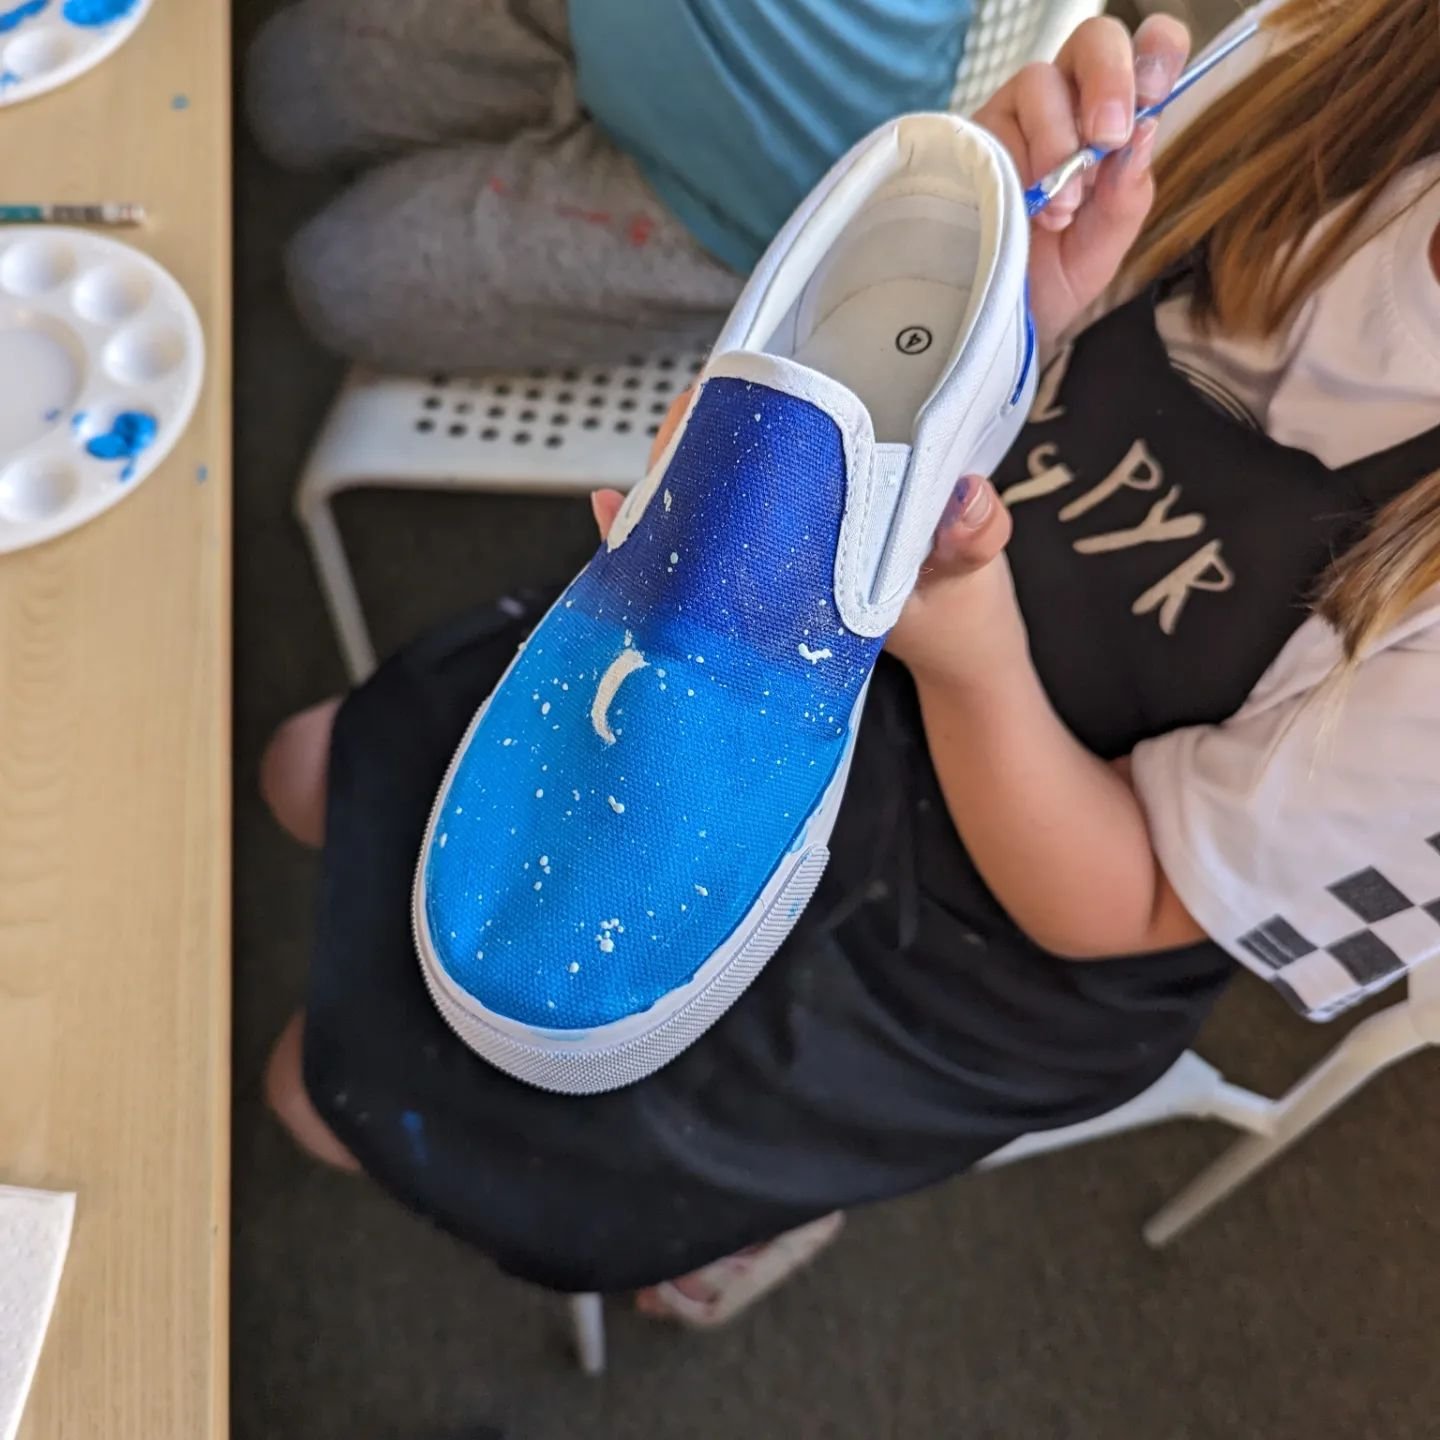 Our 3rd to 5th grade students painted custom shoes!